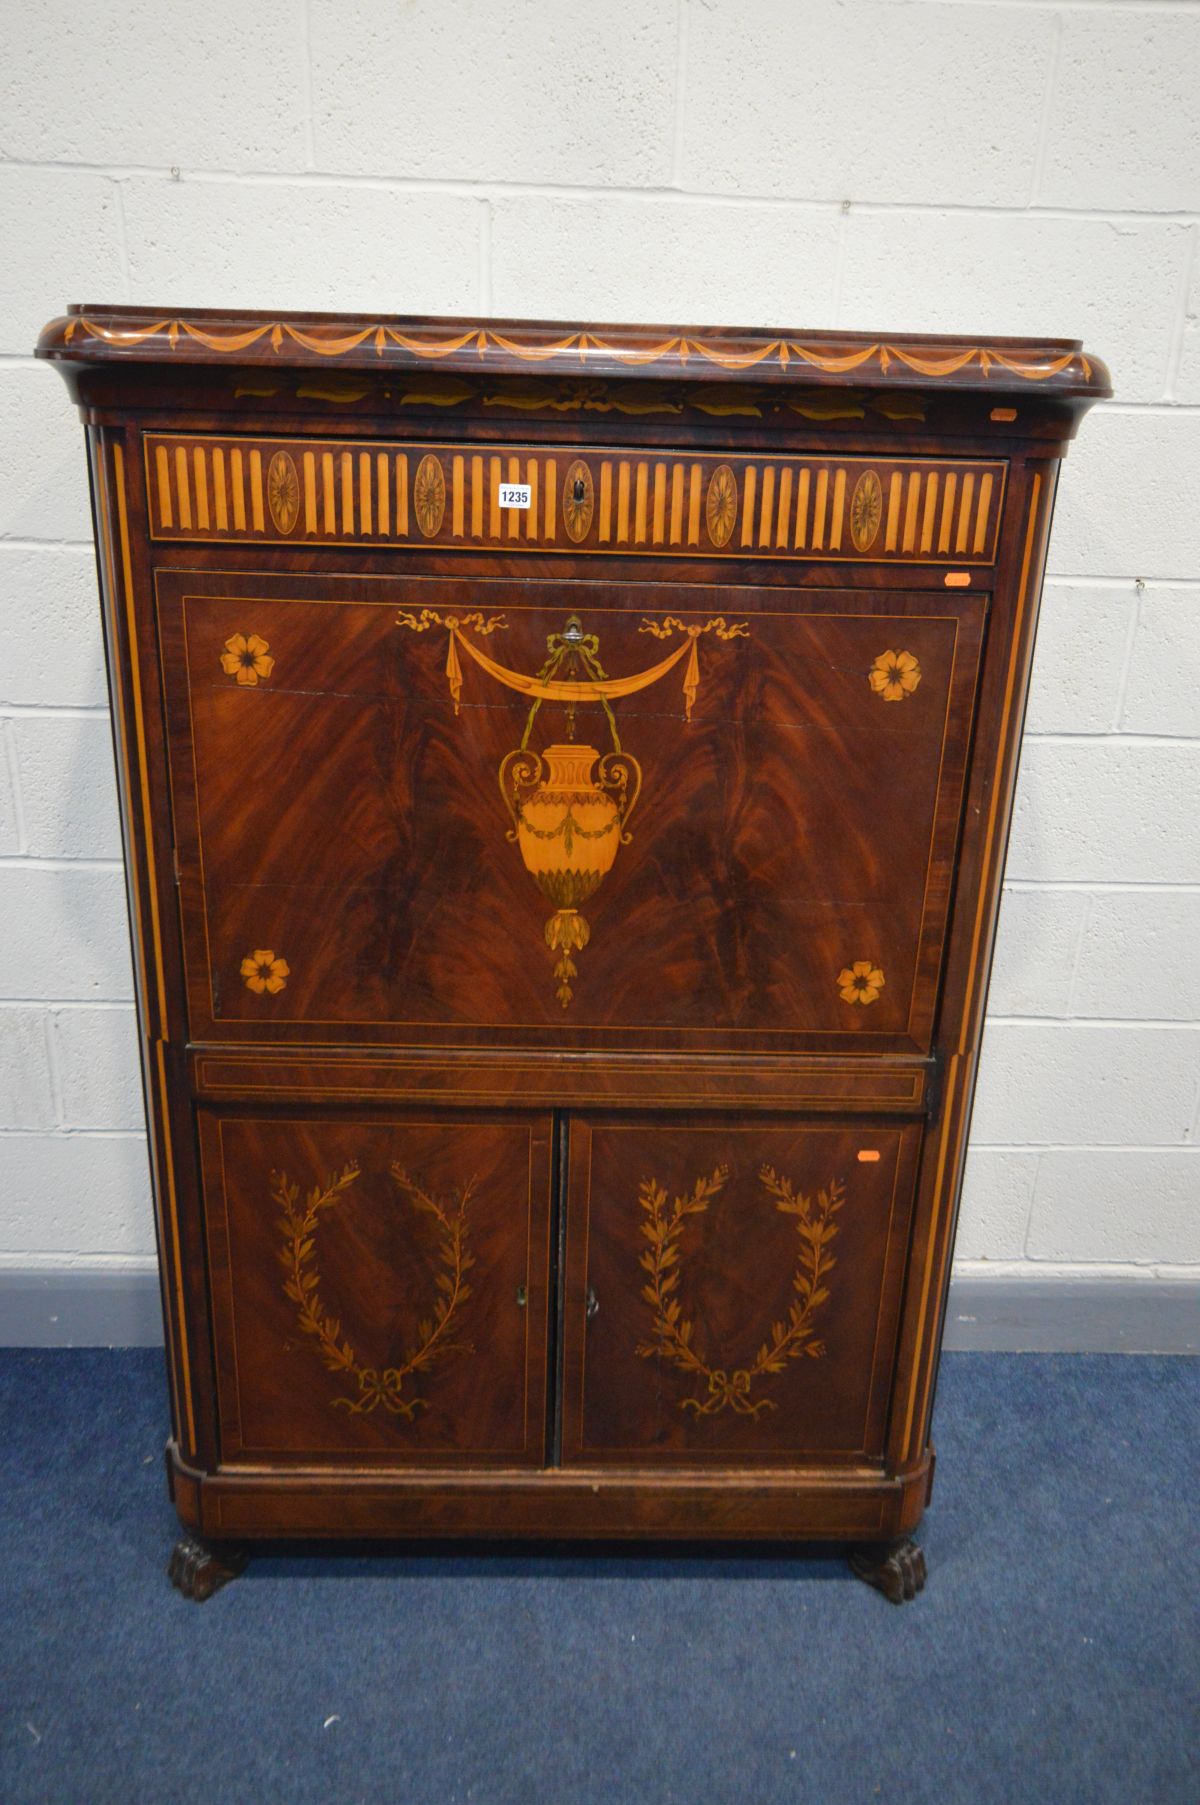 A LOUIS XVI MAHOGANY AND MARQUETRY INLAID SECRETAIRE A ABATANT, 18th century, the single drawer